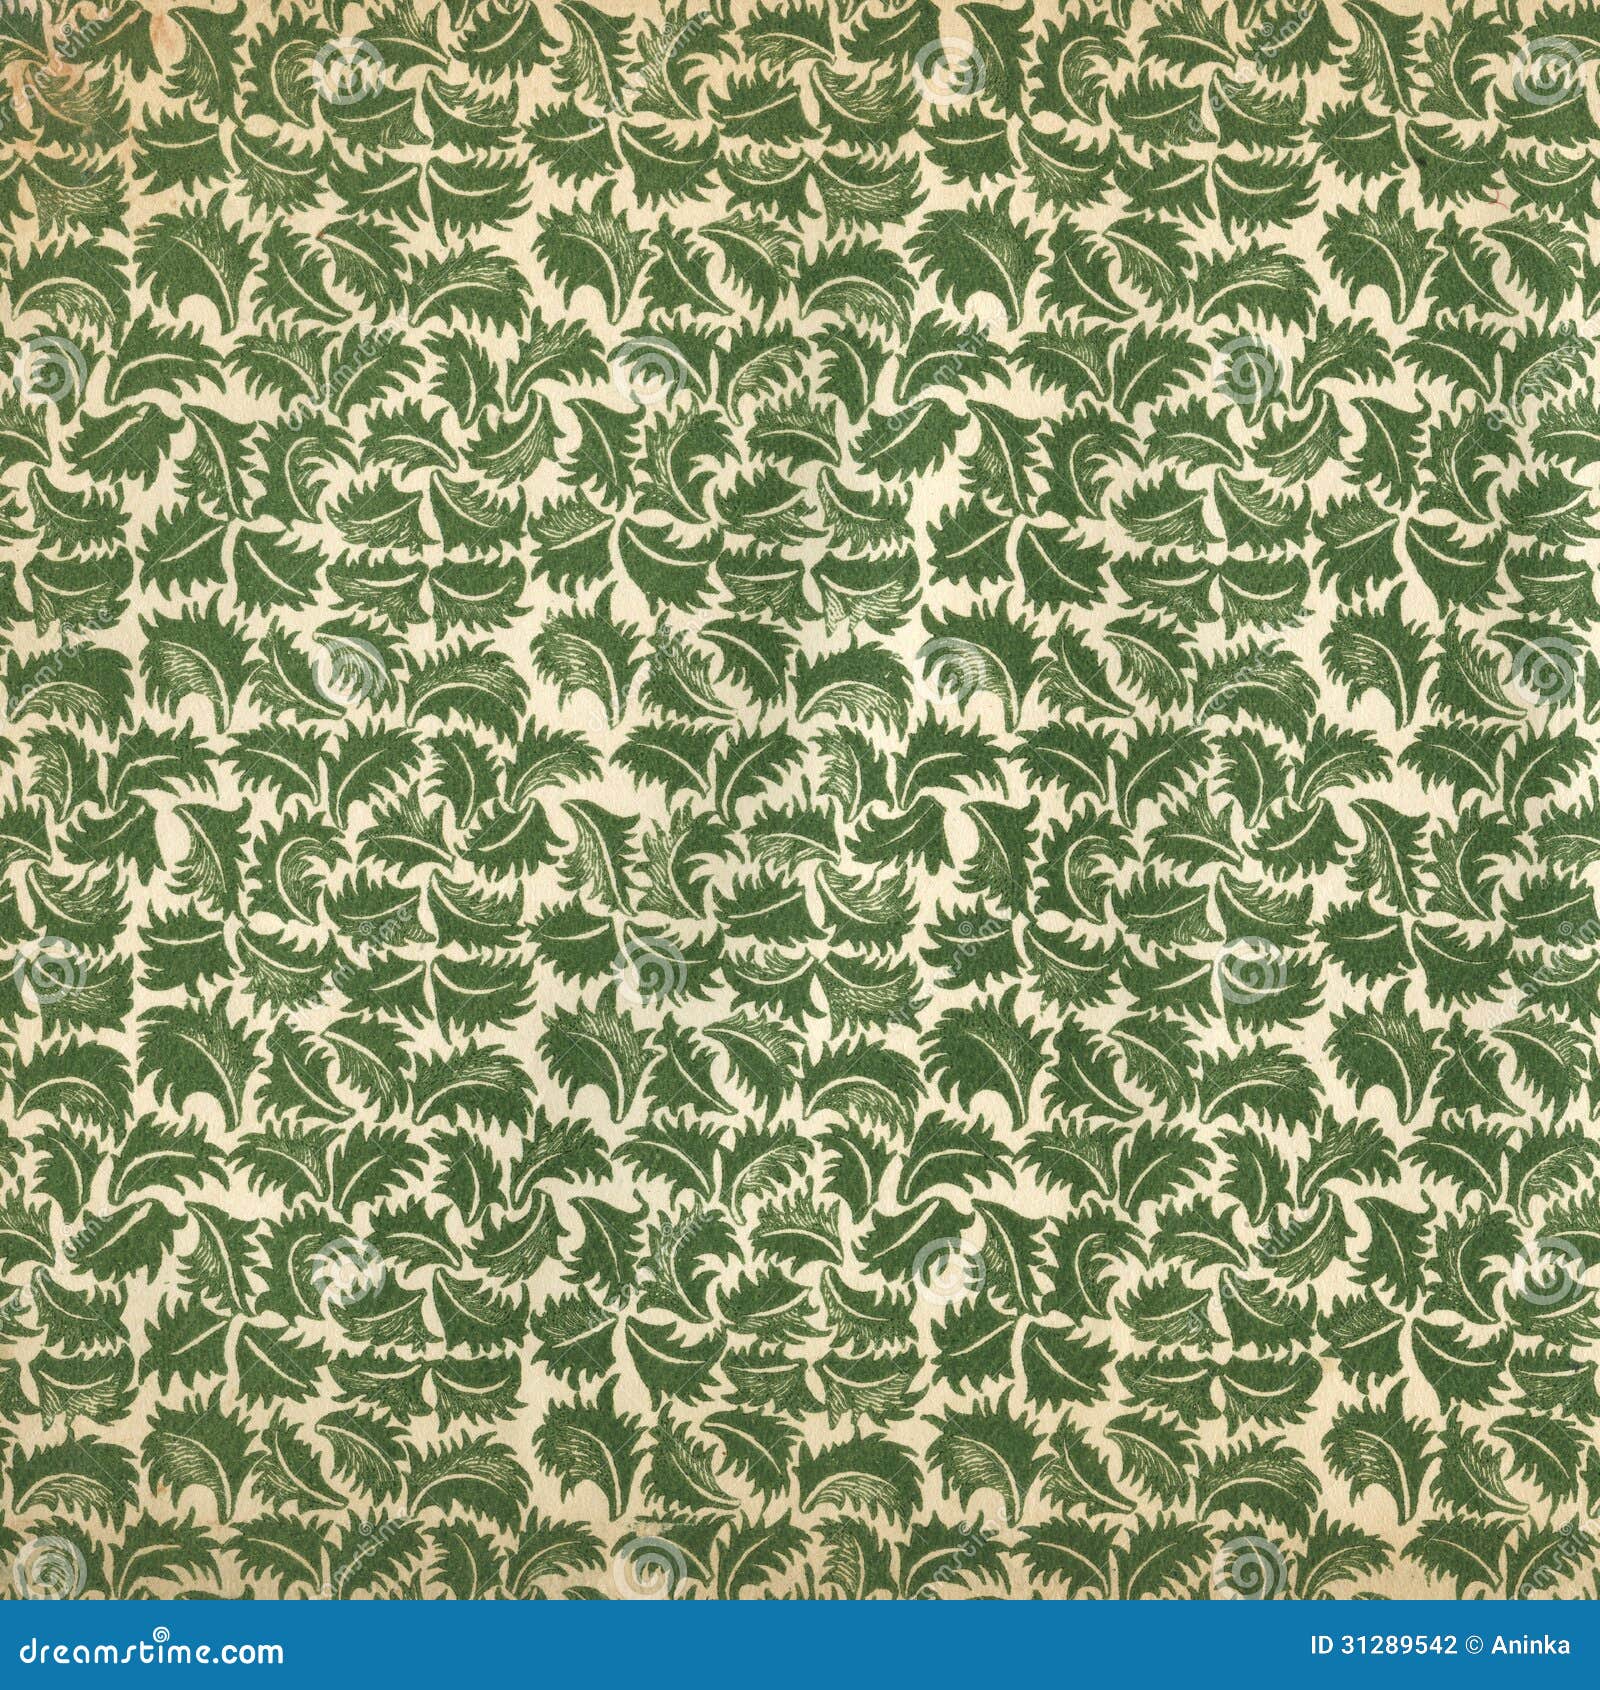 vintage wallpaper with leaves